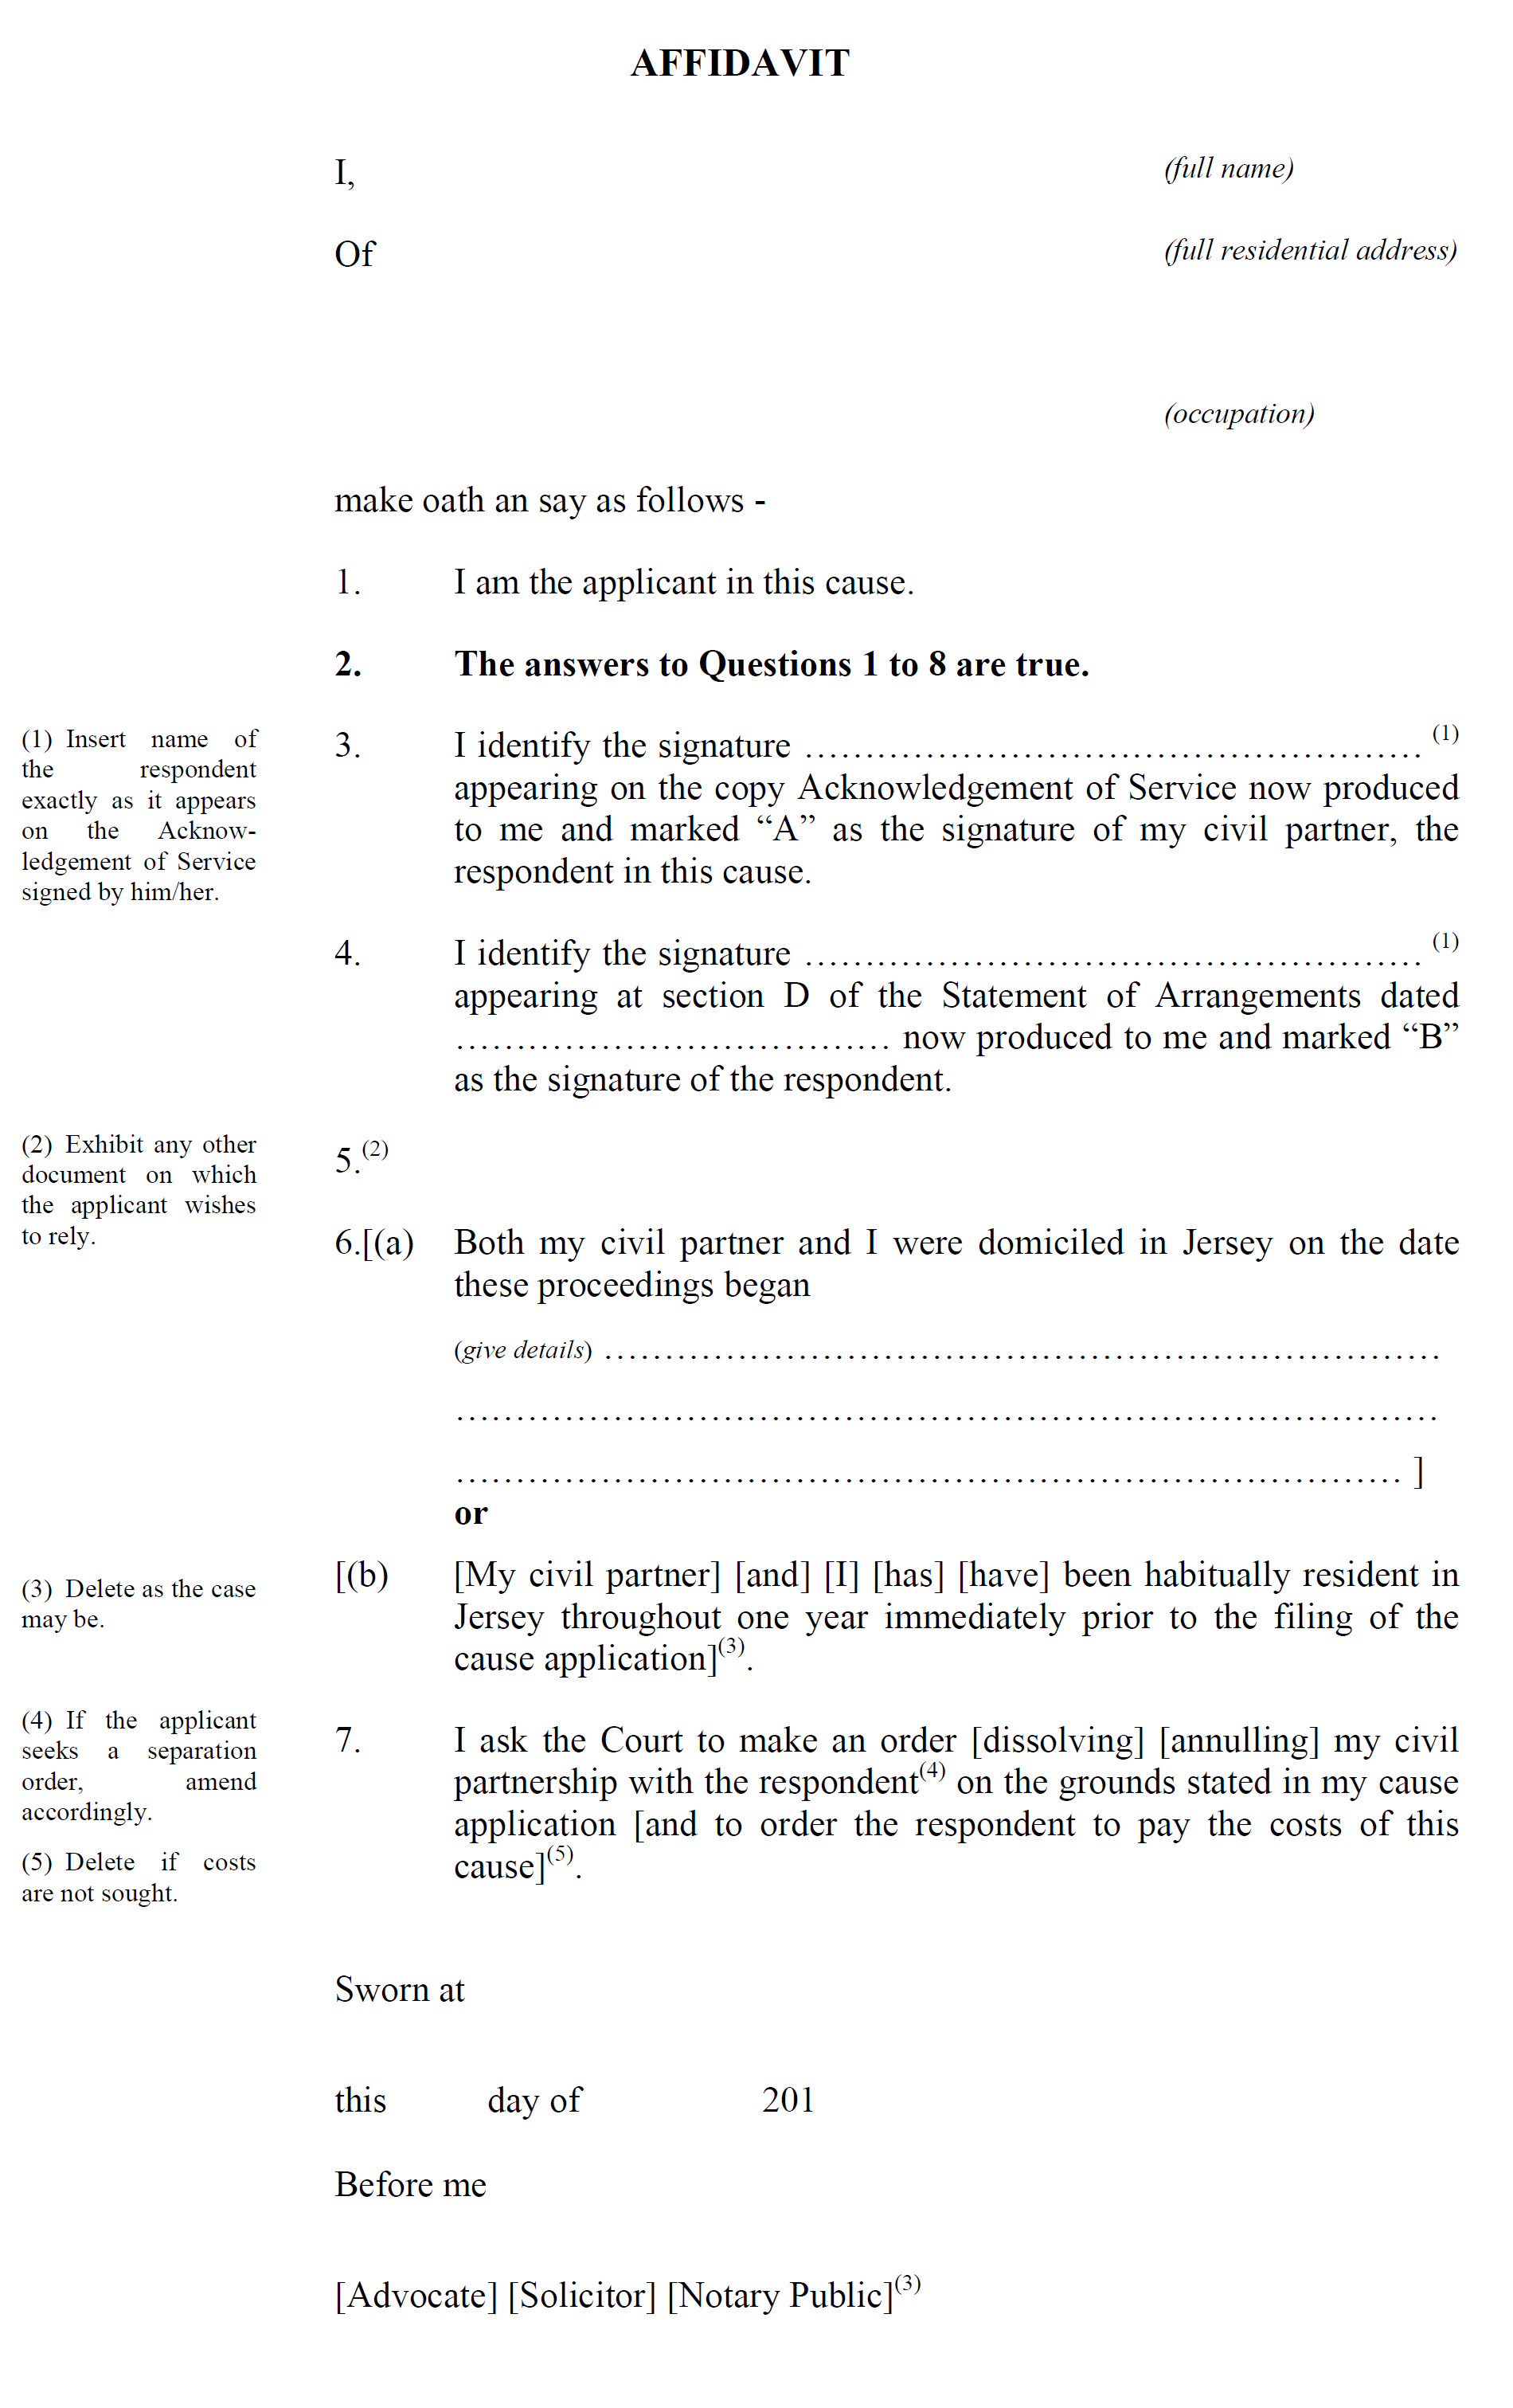 Form CP7 - Affidavit by applicant in support of cause application on the grounds of one year’s or two years’ separation, or on the ground of nullity - continued